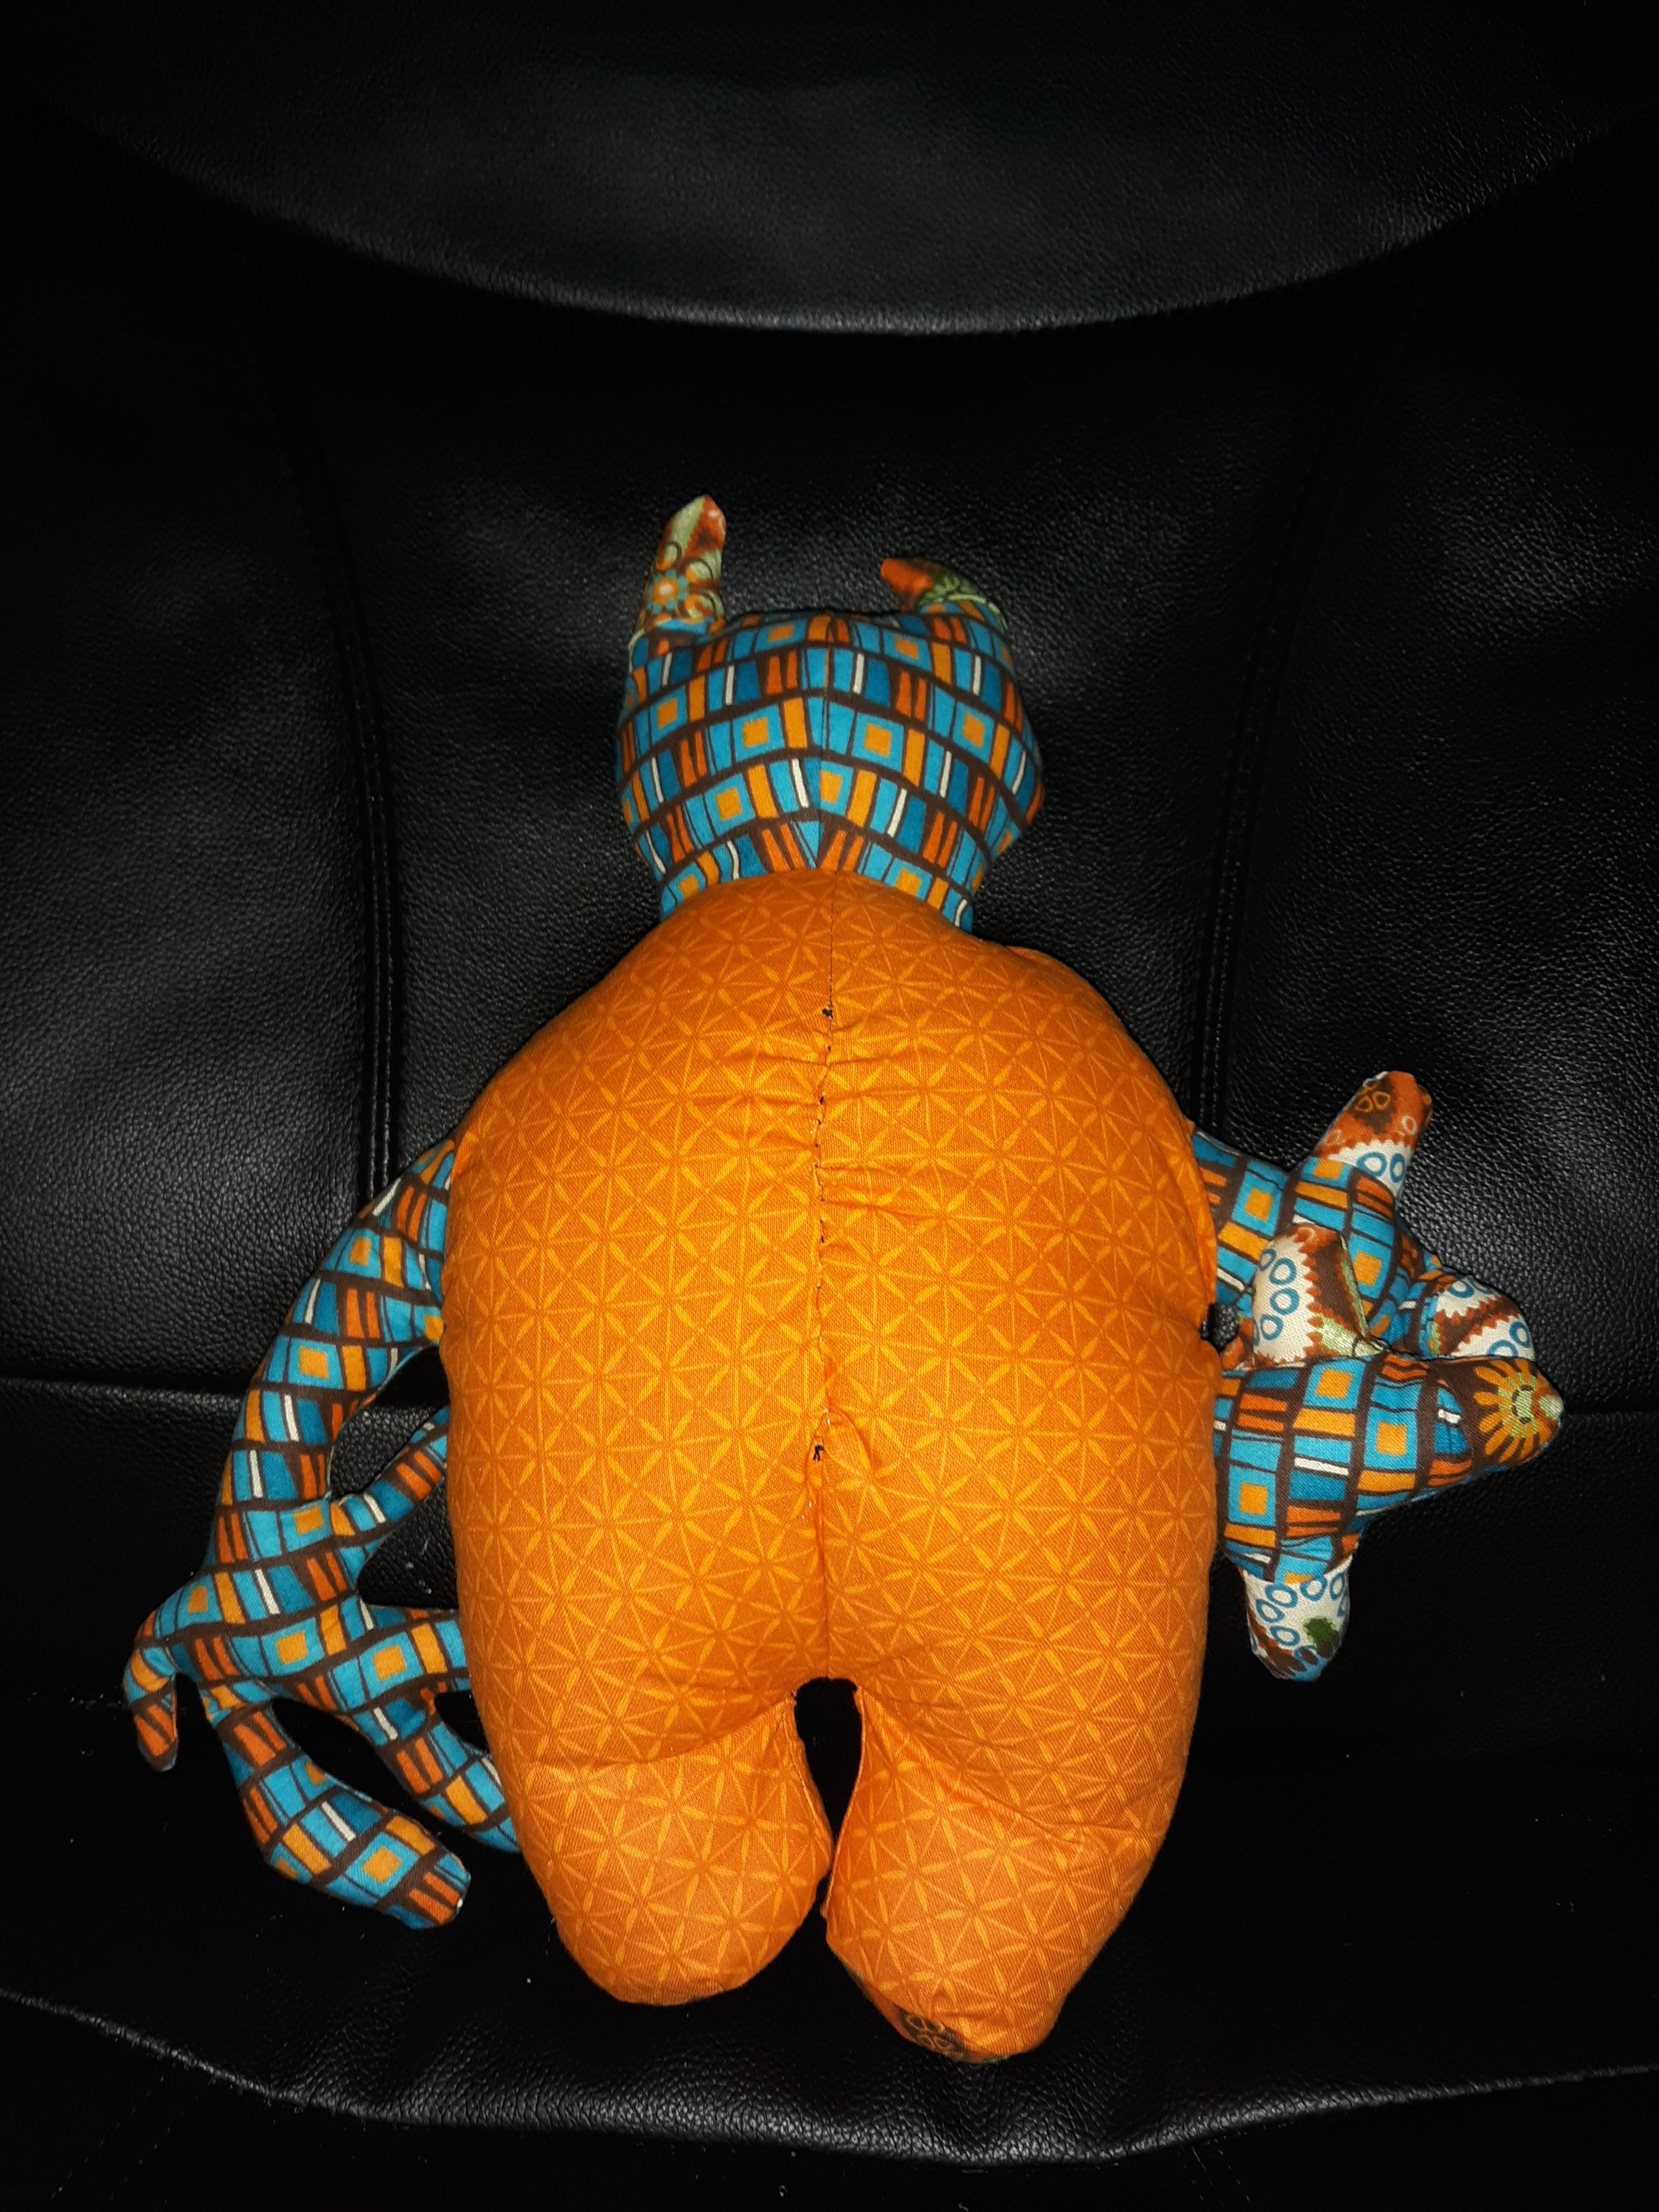 The back of the doll. The entirety of the back of the body is the same orange fabric. You can see that the fingers on the two short arms and the horns are of that brown floral pattern that the belly has.